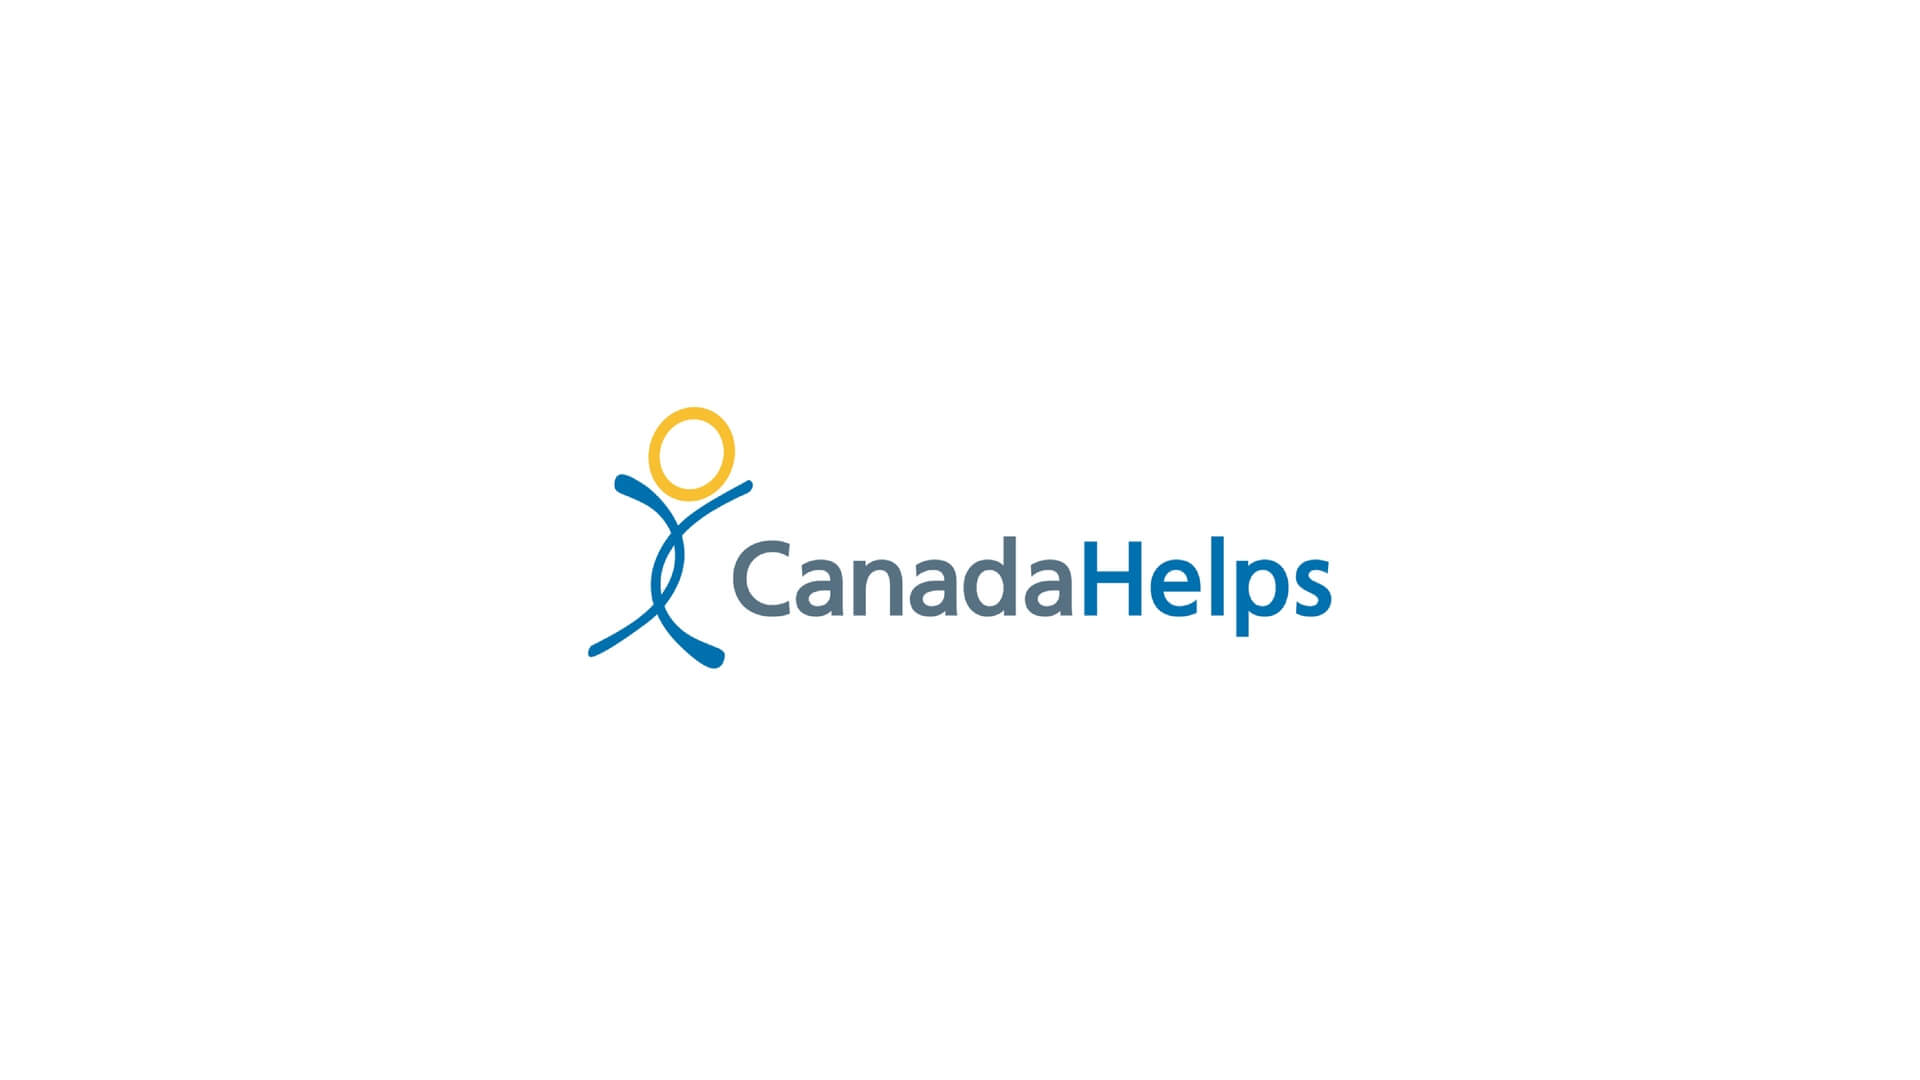 Timmins Care Logo of canadahelps featuring a stylized human figure with arms raised above, integrated into the wordmark, against a white background. Cochrane District Social Services Administration Board